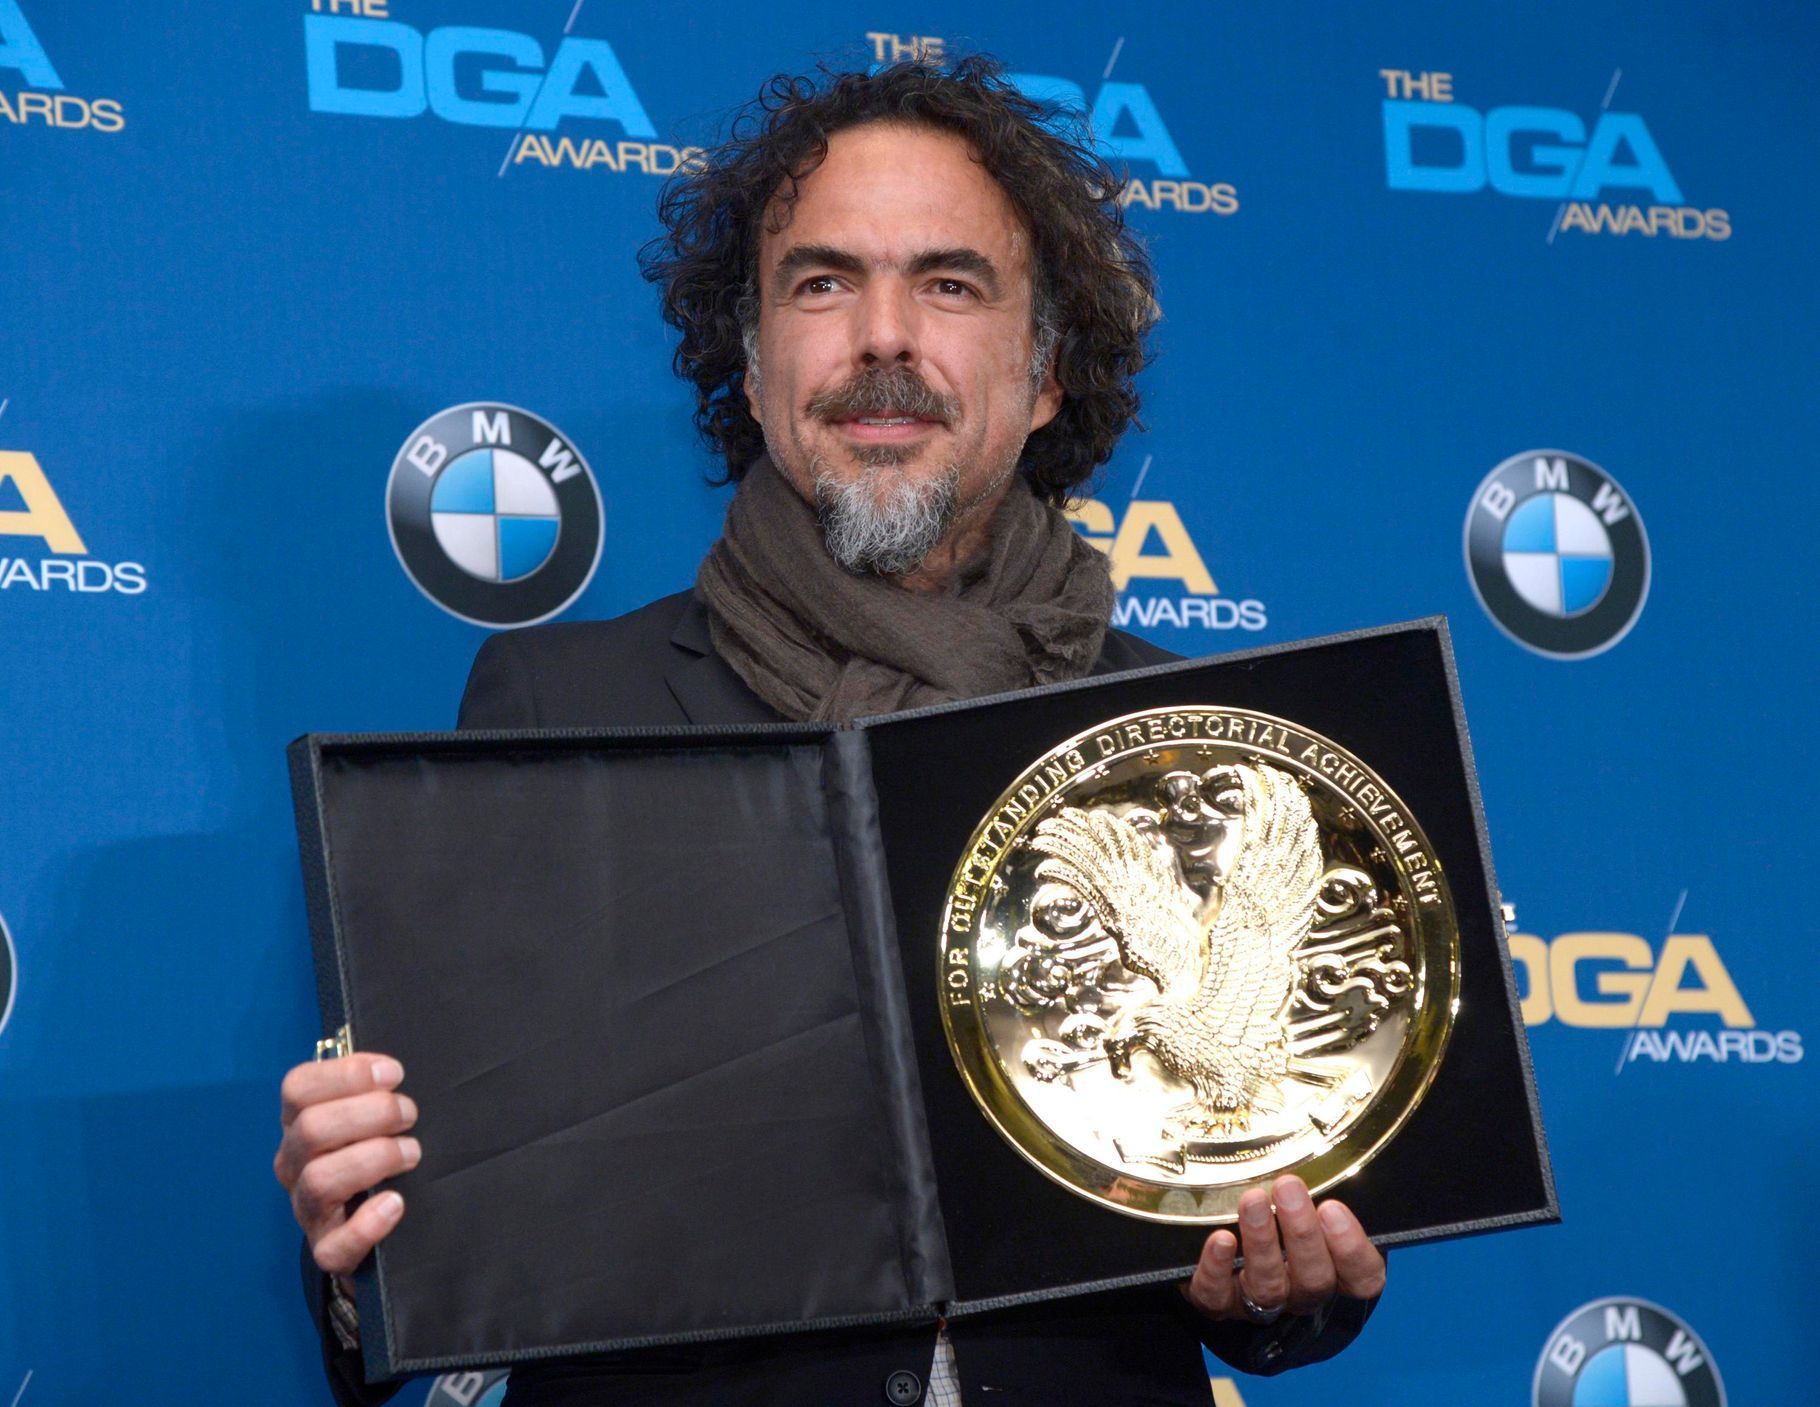 Alejandro G. Inarritu accepts the 2014 DGA Feature Film Award at the 67th annual DGA Awards in Los Angeles